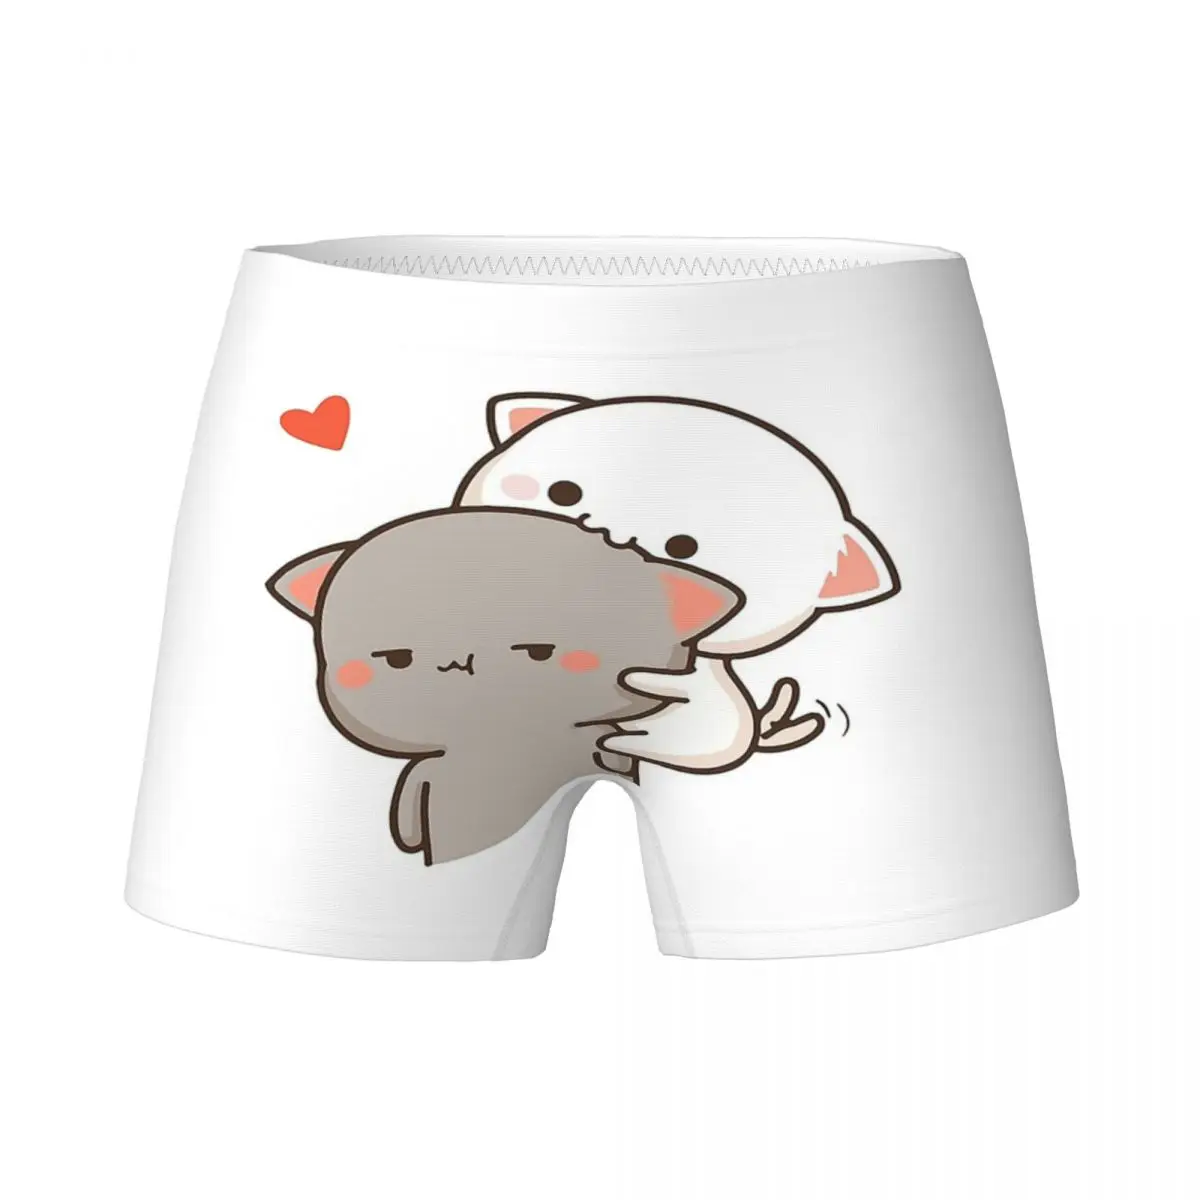 

Youth Girls Cat Couple Peach And Goma Boxers Child Pure Cotton Underwear Kids Teenage Underpants Soft Briefs 4-15Y